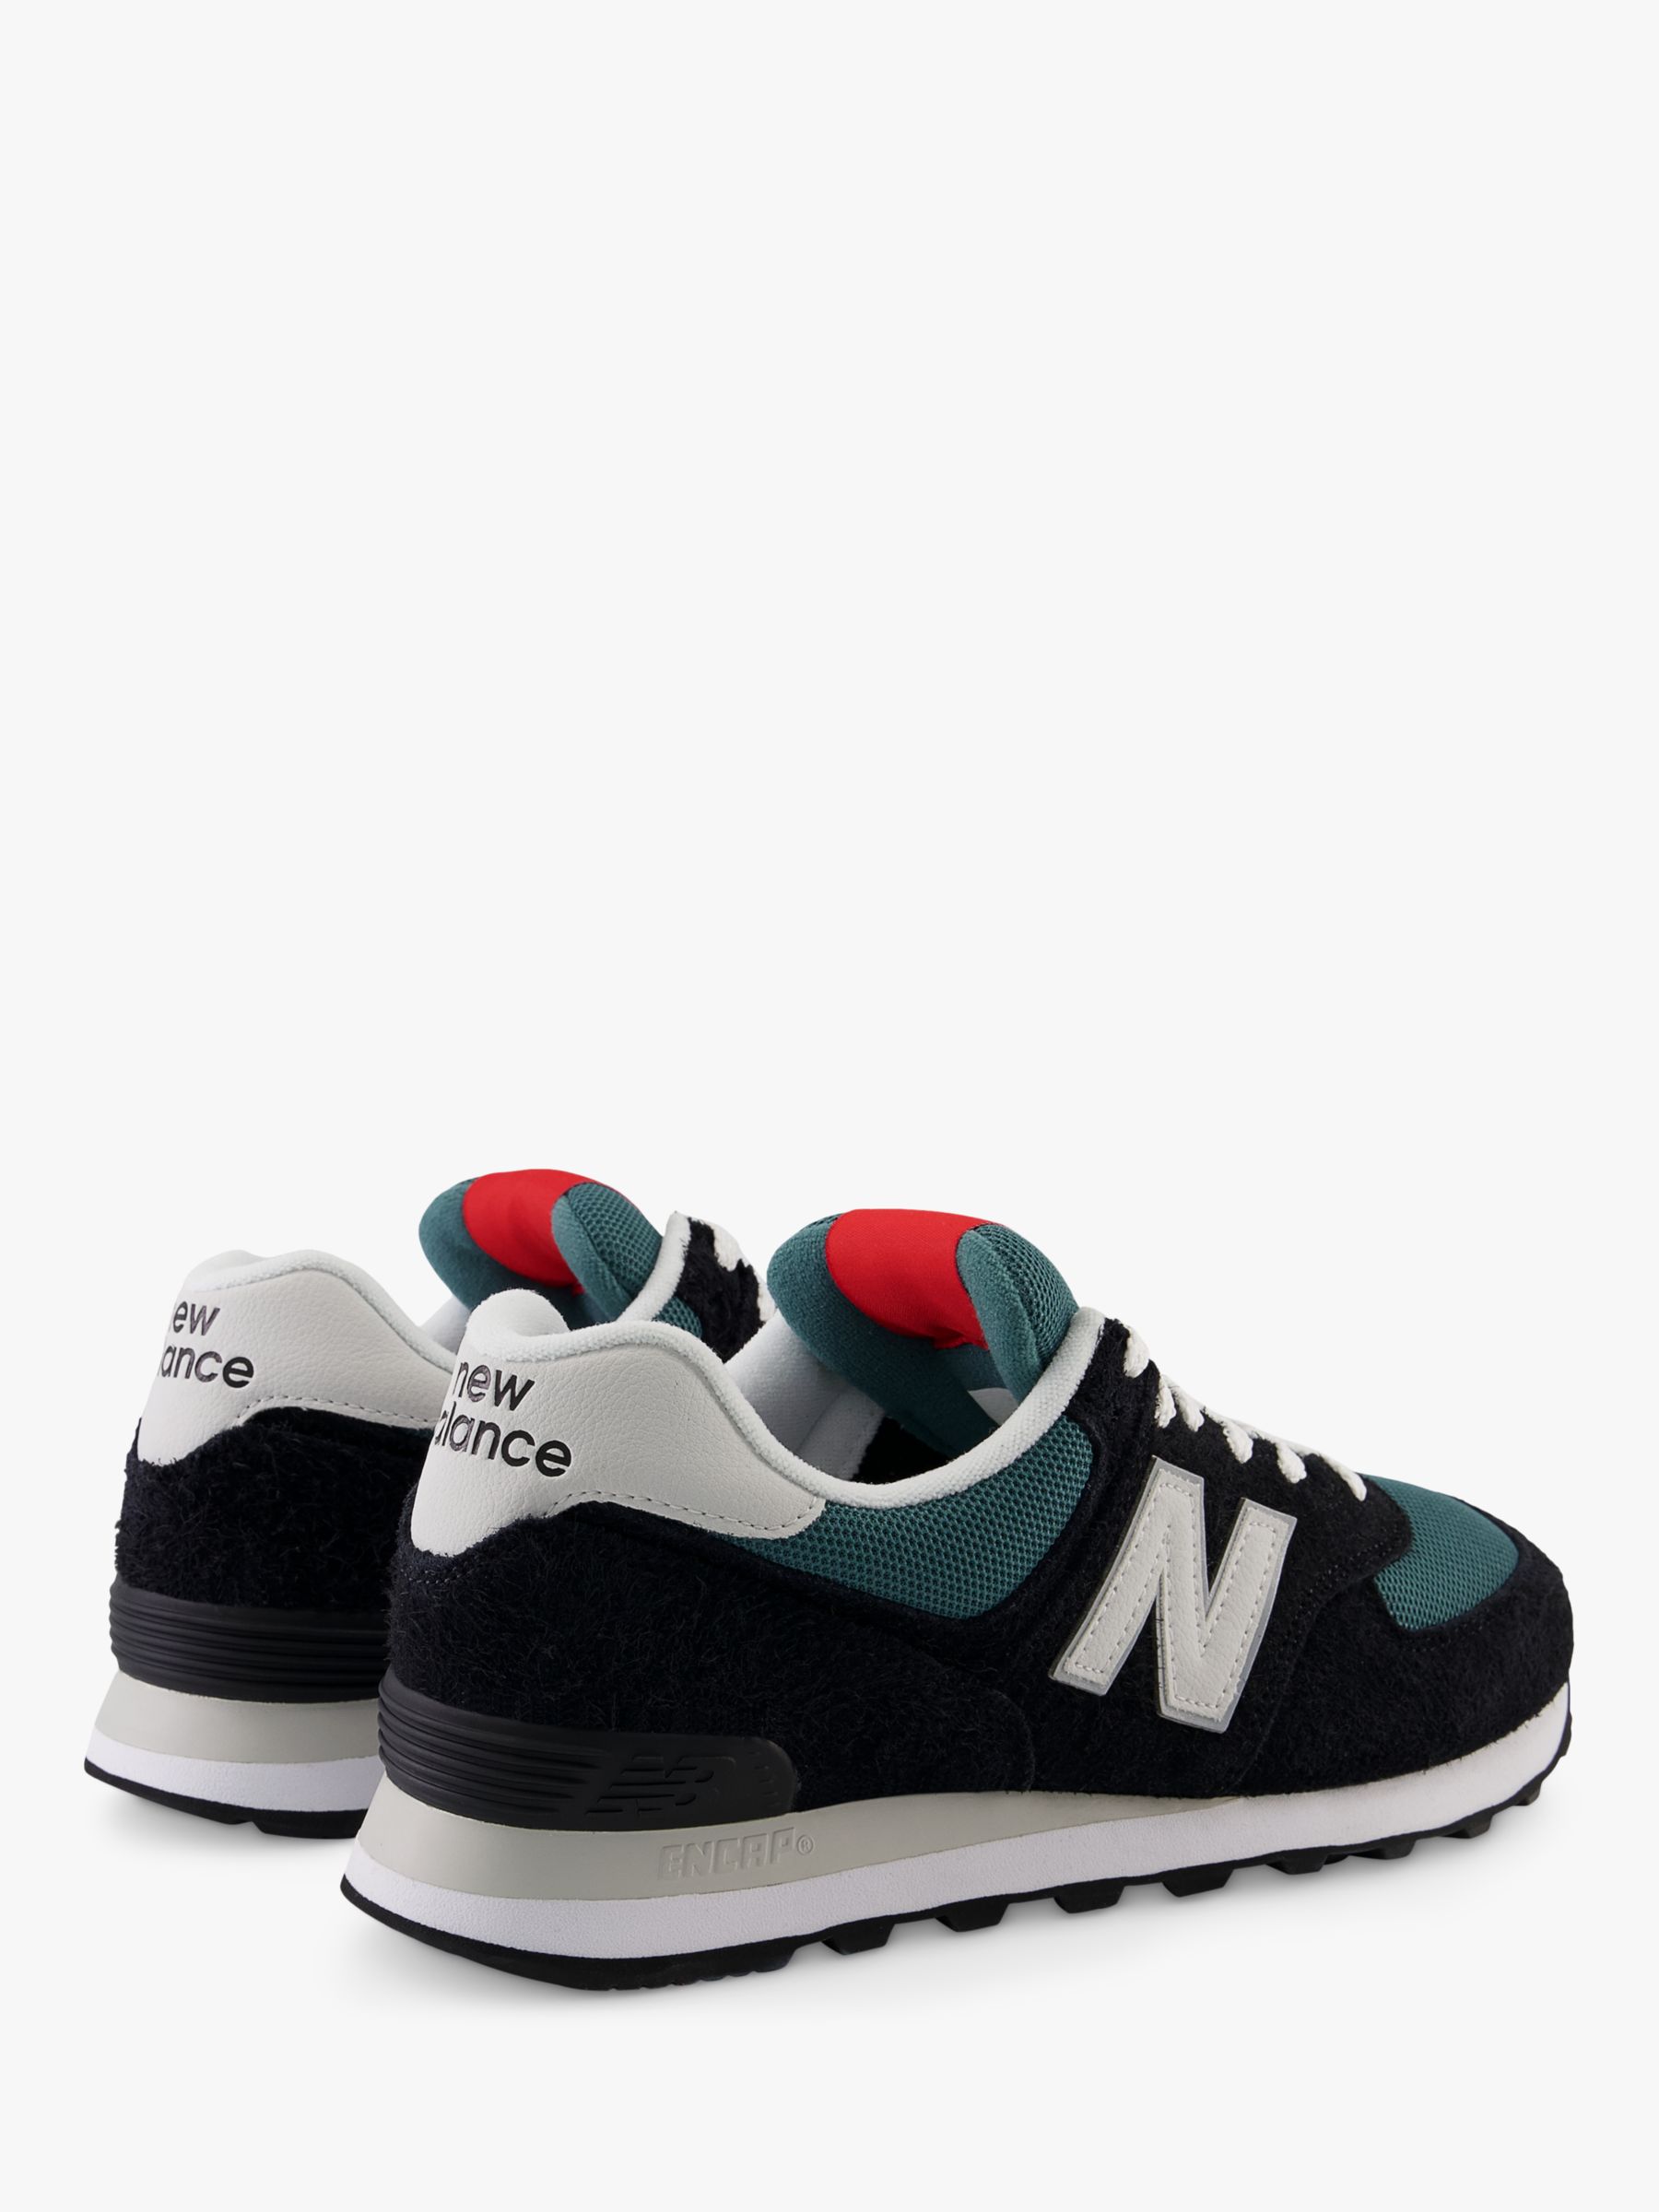 Buy New Balance 574 Suede Trainers Online at johnlewis.com